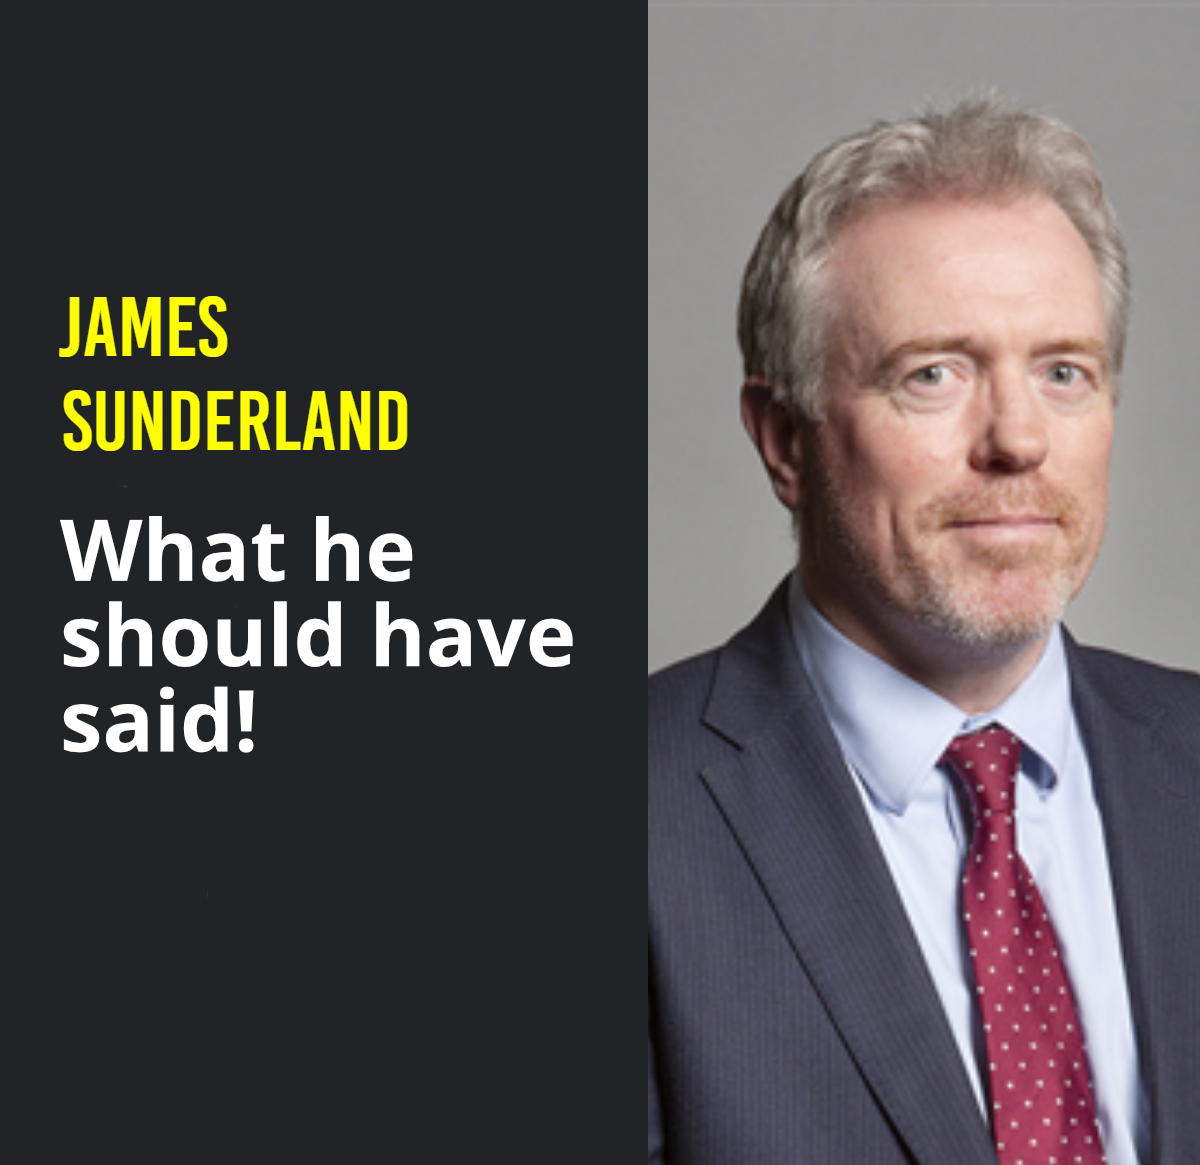 James Sunderland, what he should have said